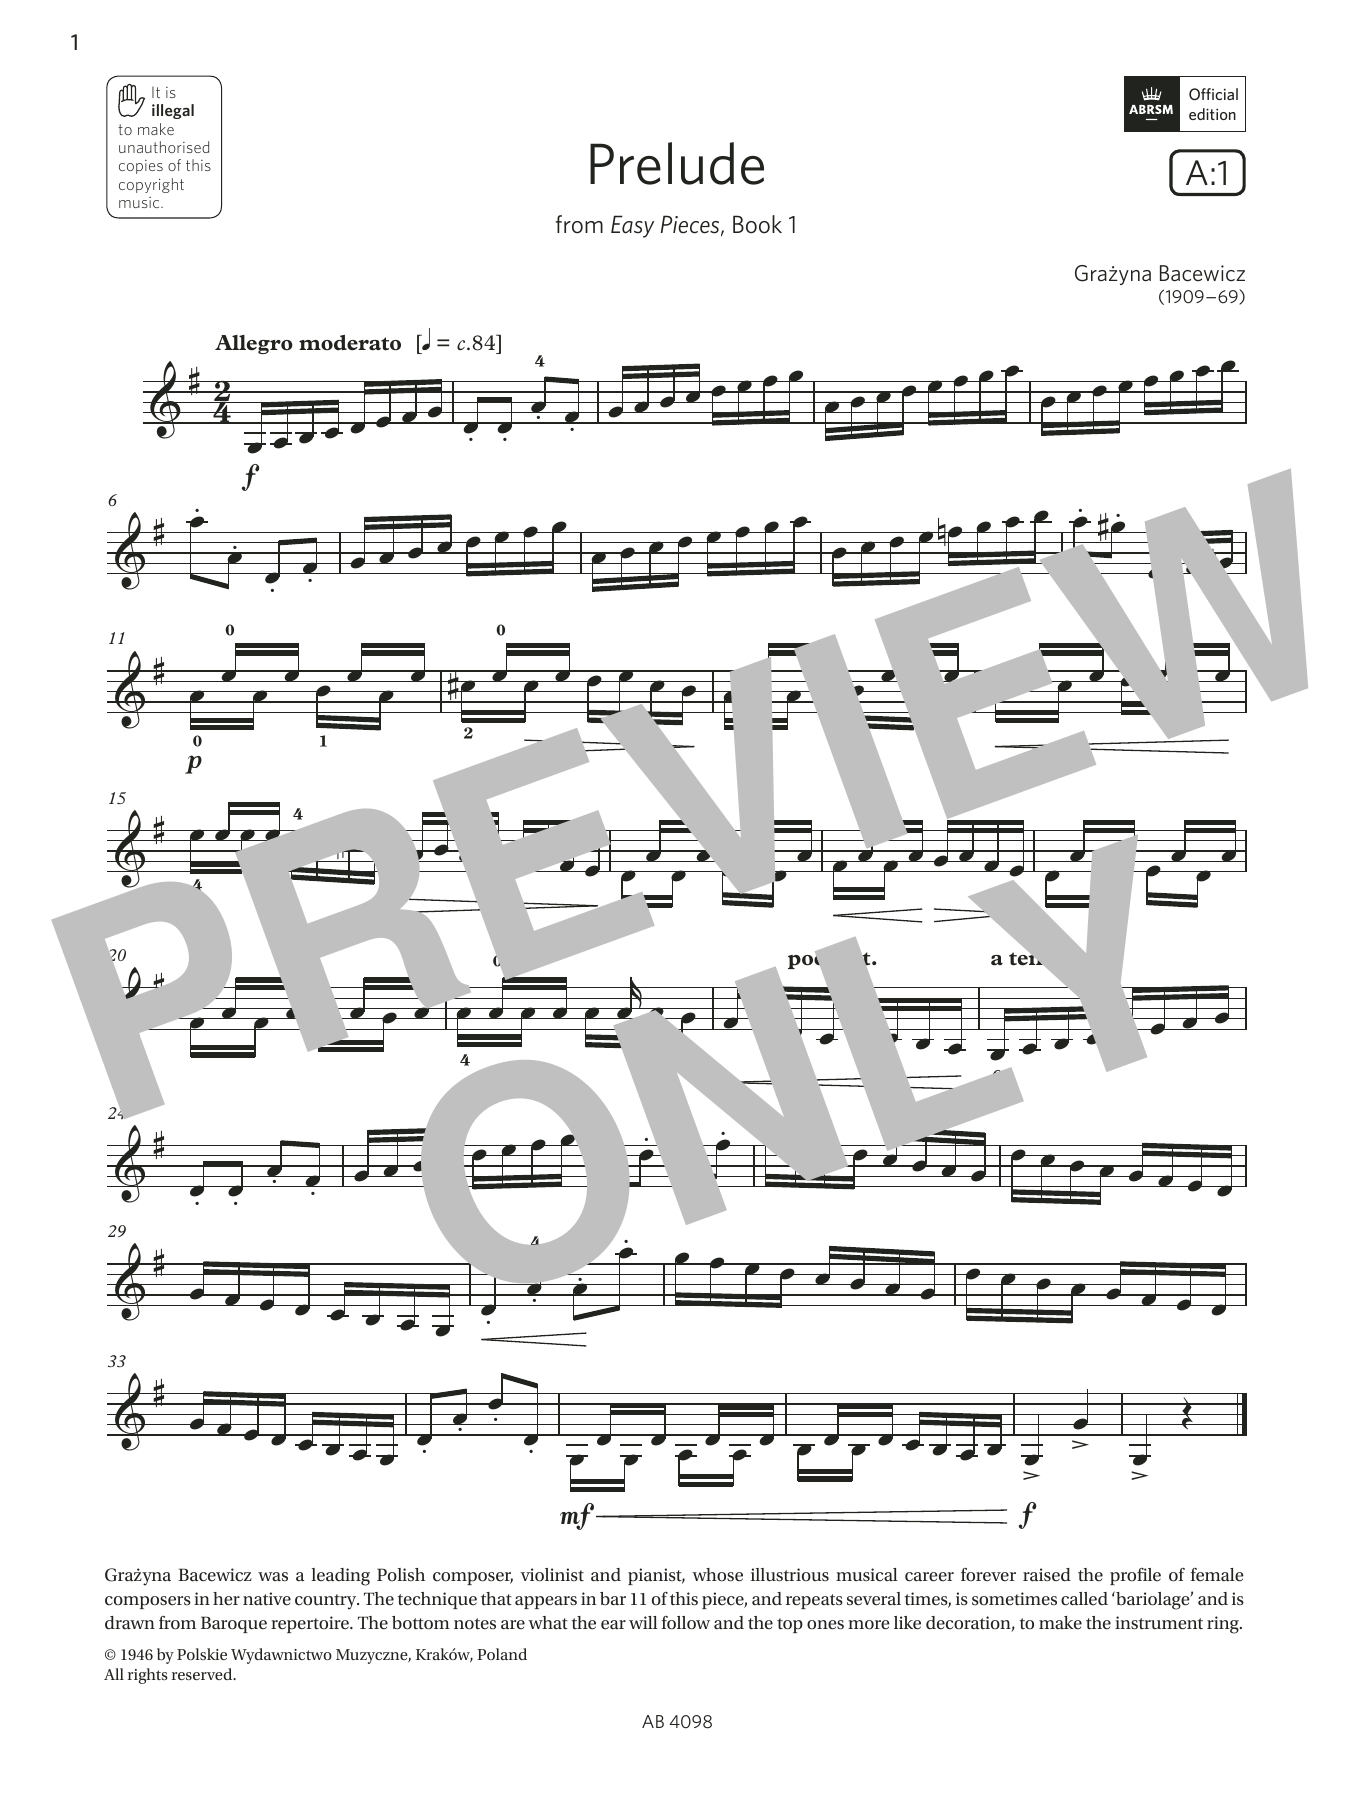 Download Grażyna Bacewicz Prelude (Grade 4, A1, from the ABRSM Vi Sheet Music